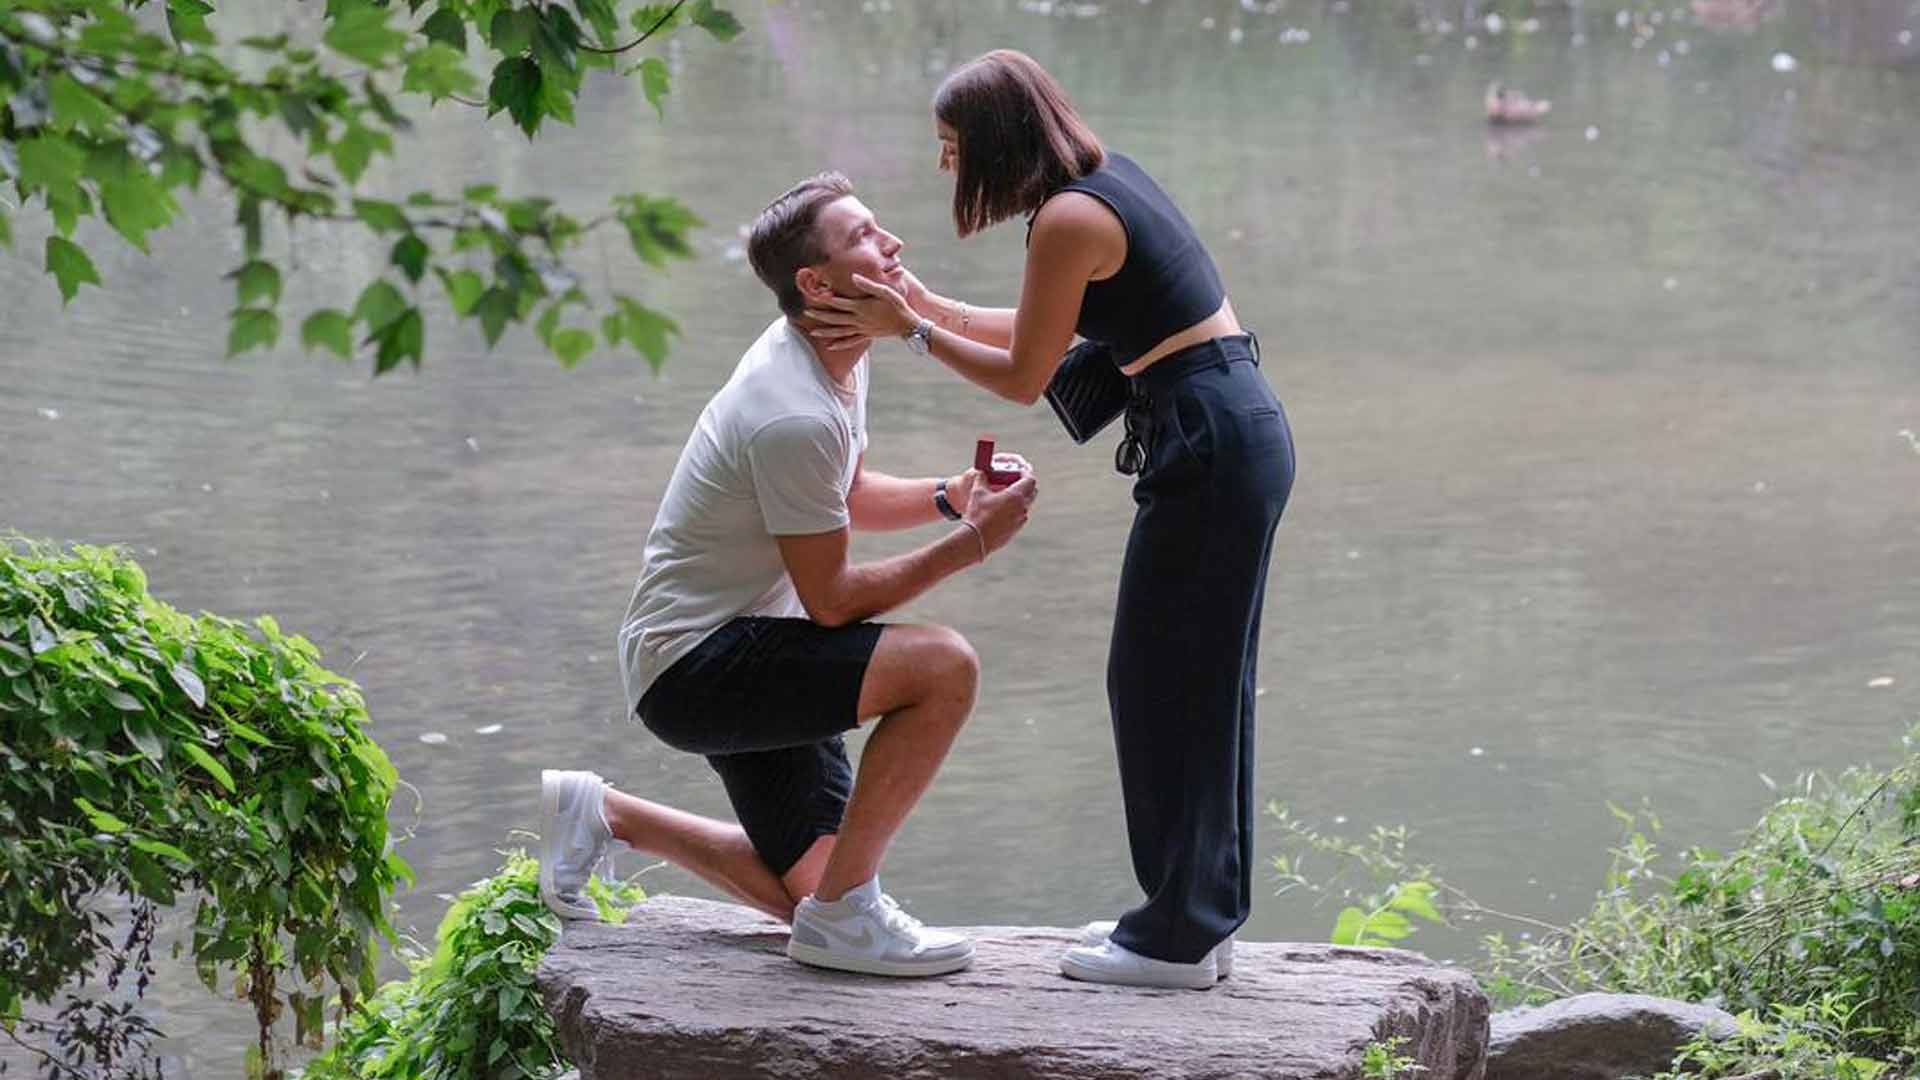 Jackson Withrow gets engaged to Allie Sweeney in Central Park.